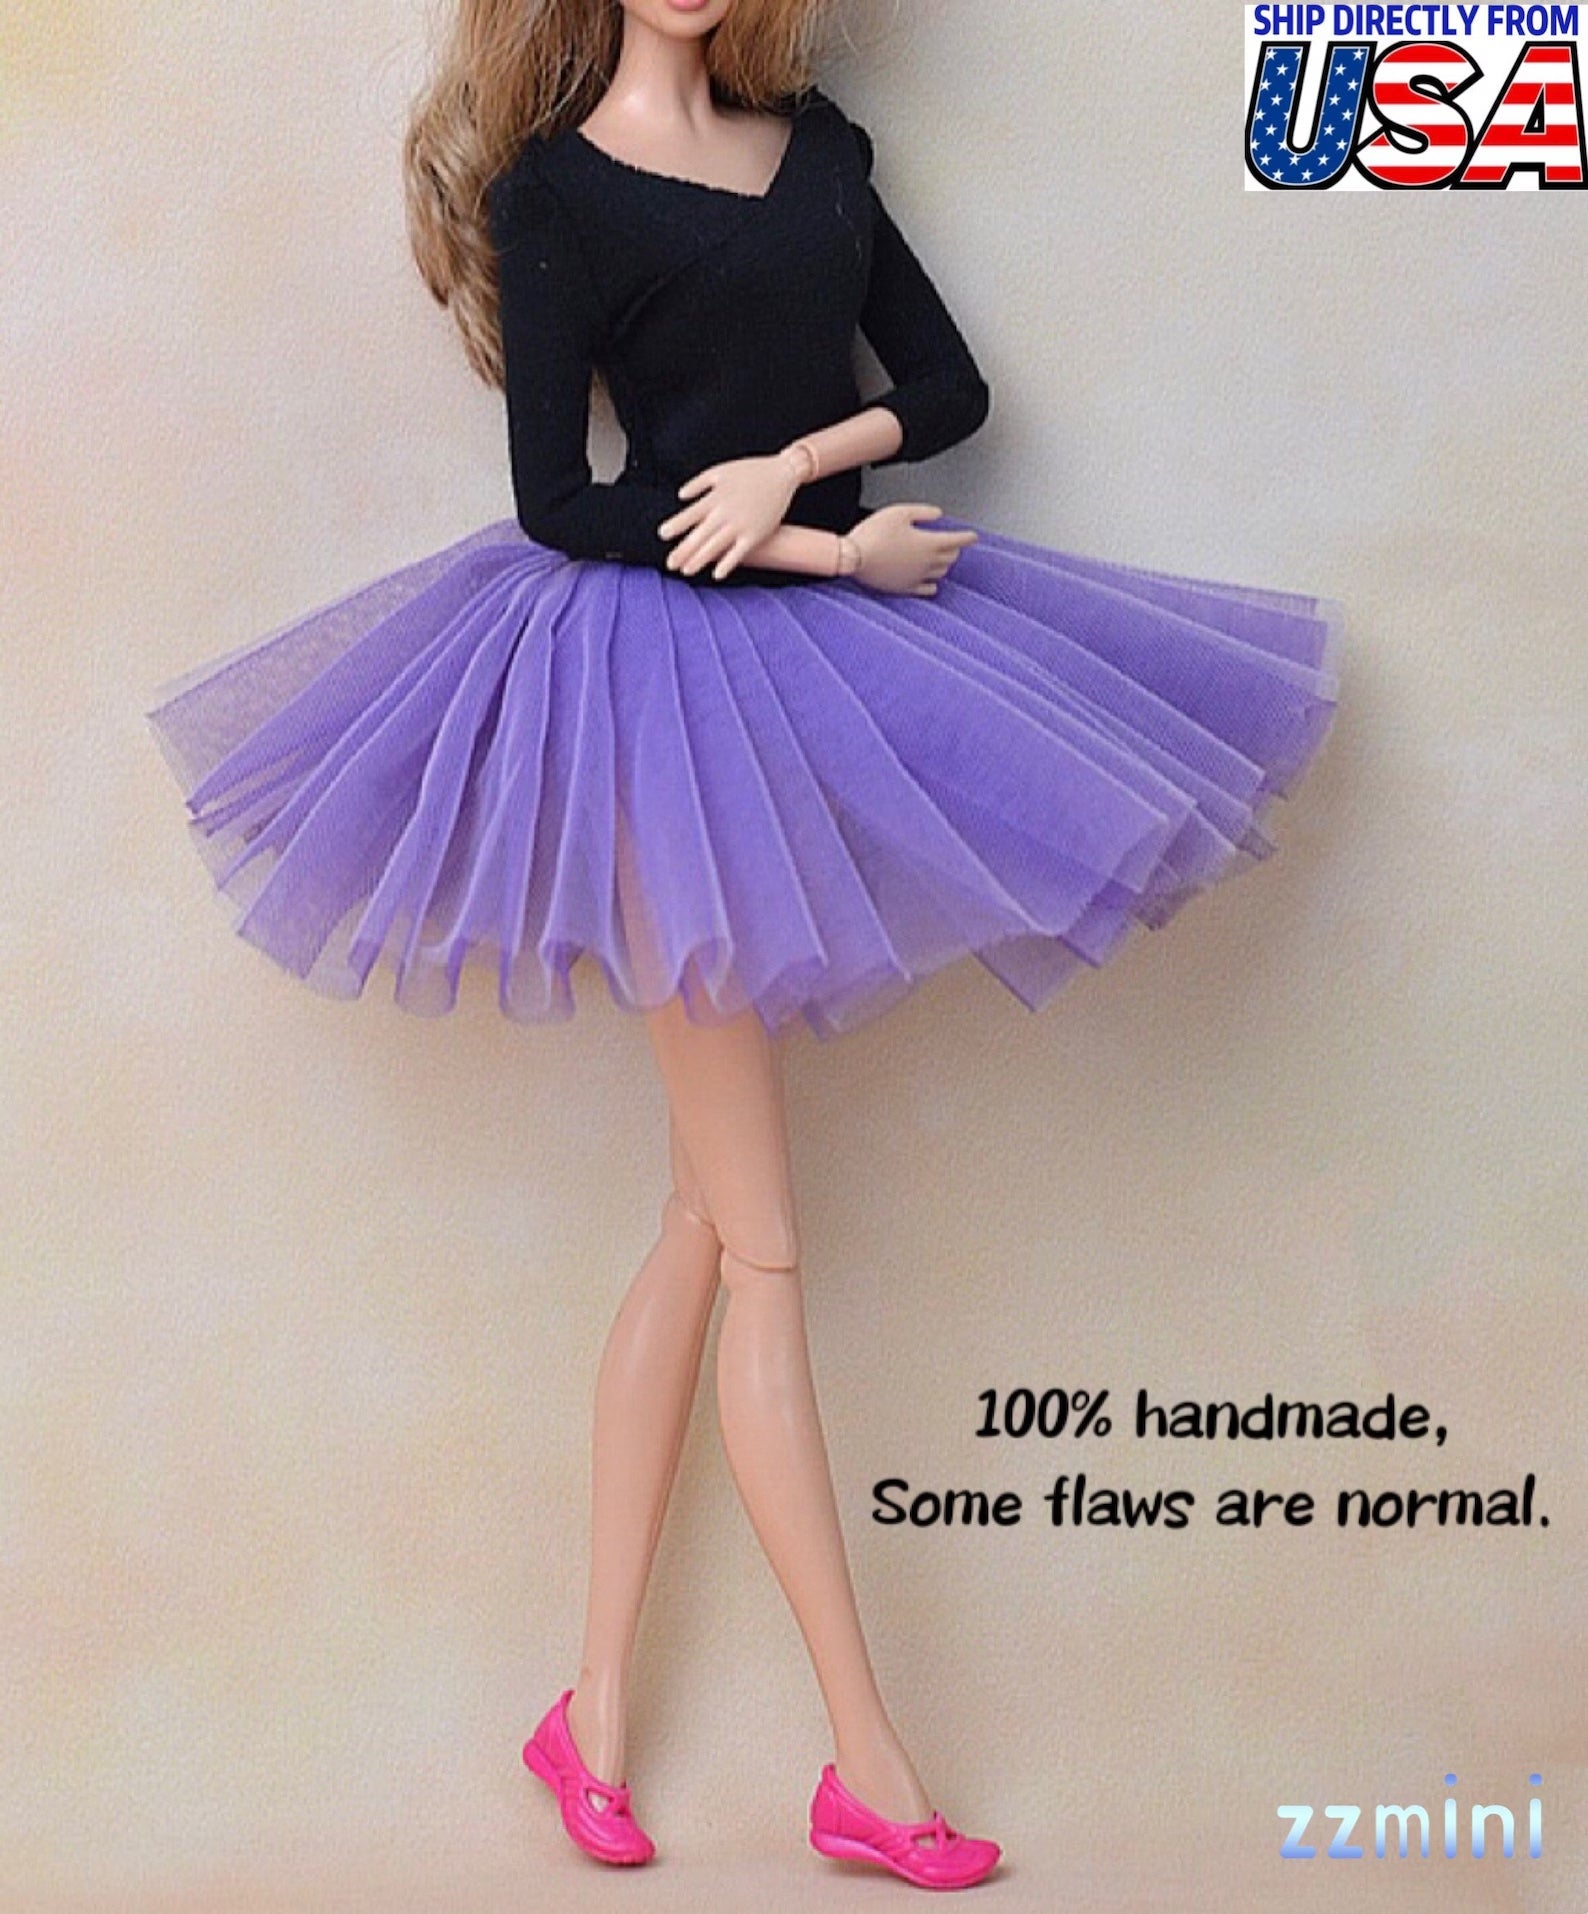 11.5'' Fashion Doll Black and Purple Ballet Dress Princess Grown Handmade Wedding Party Dresses For Doll Use